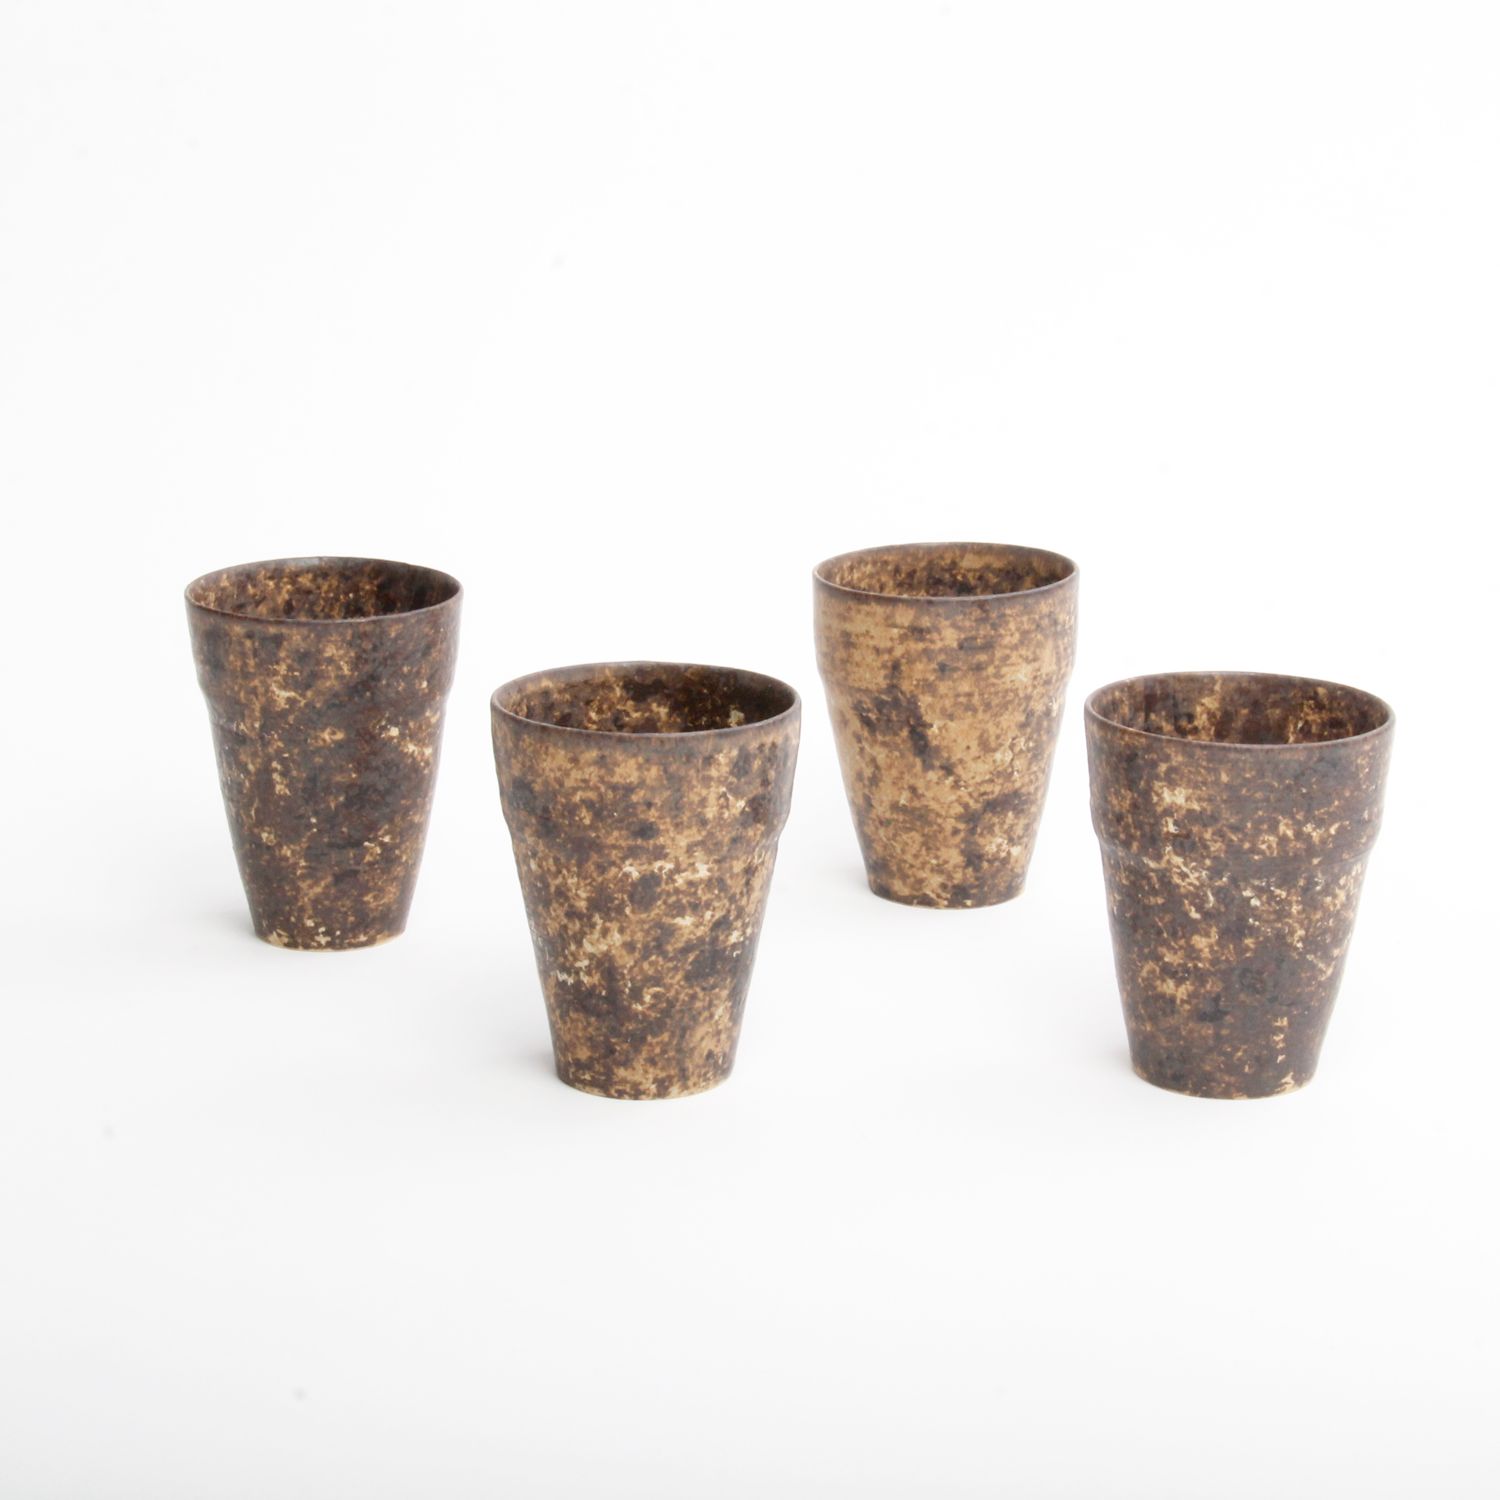 Makiko Hicher: Brown Cup Product Image 3 of 4